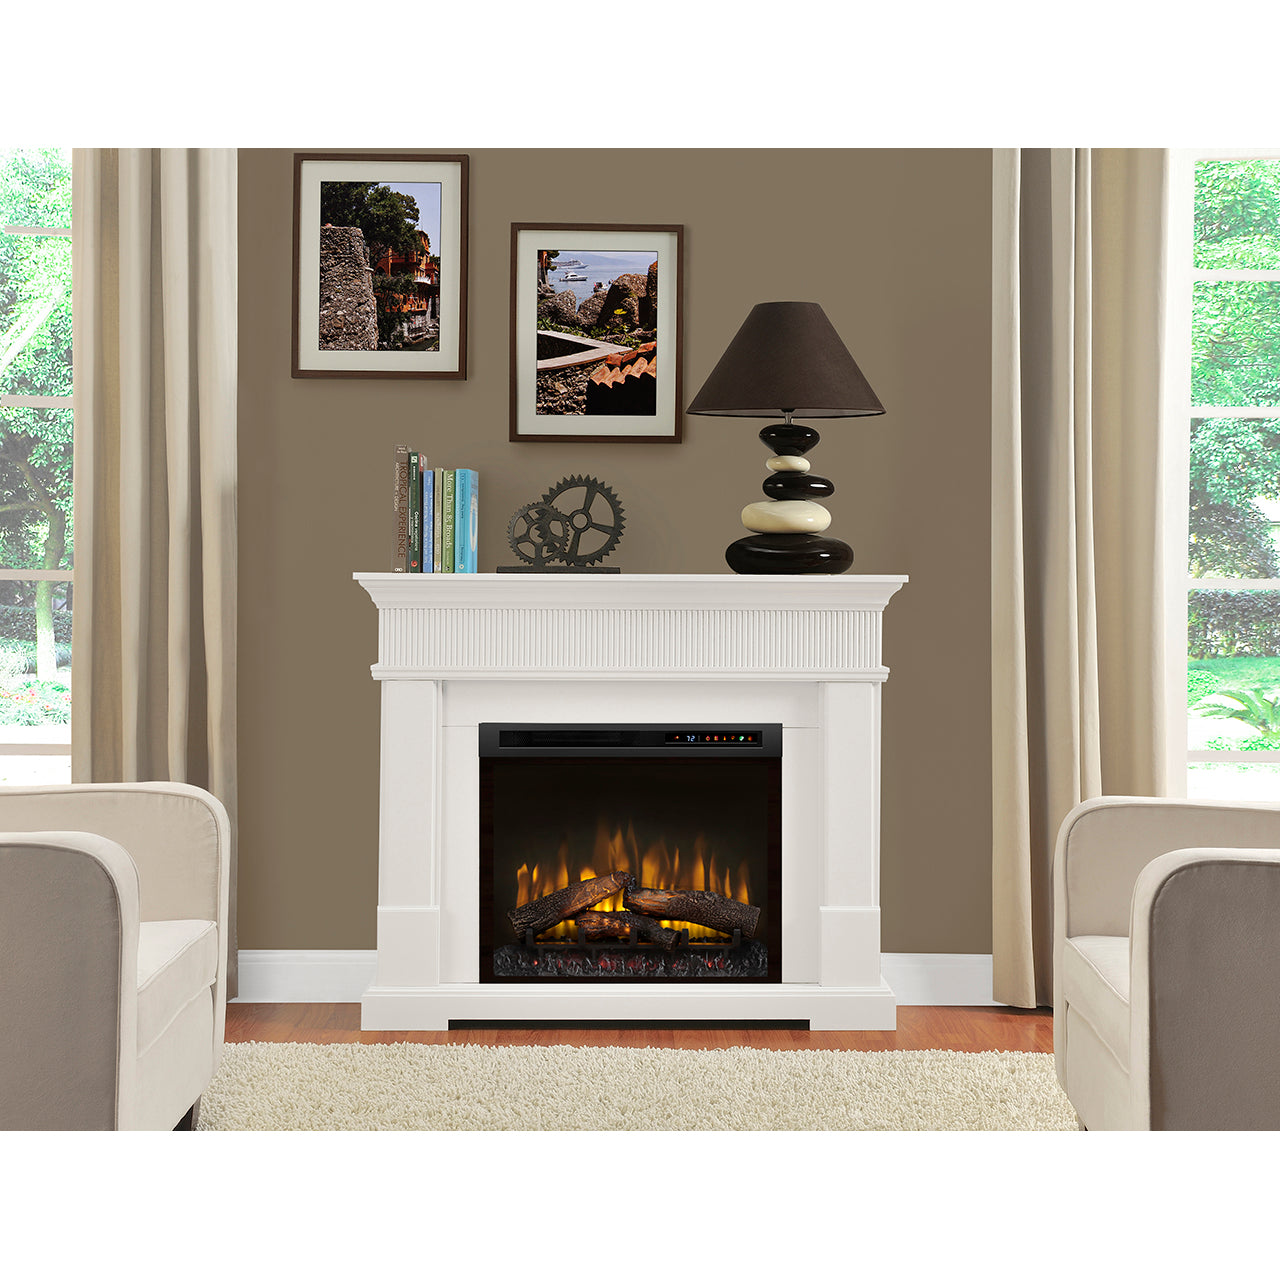 Dimplex Jean Mantel with 28-Inch Electric Firebox and Log Set - GDS28L8-1802W - Fireplace Choice